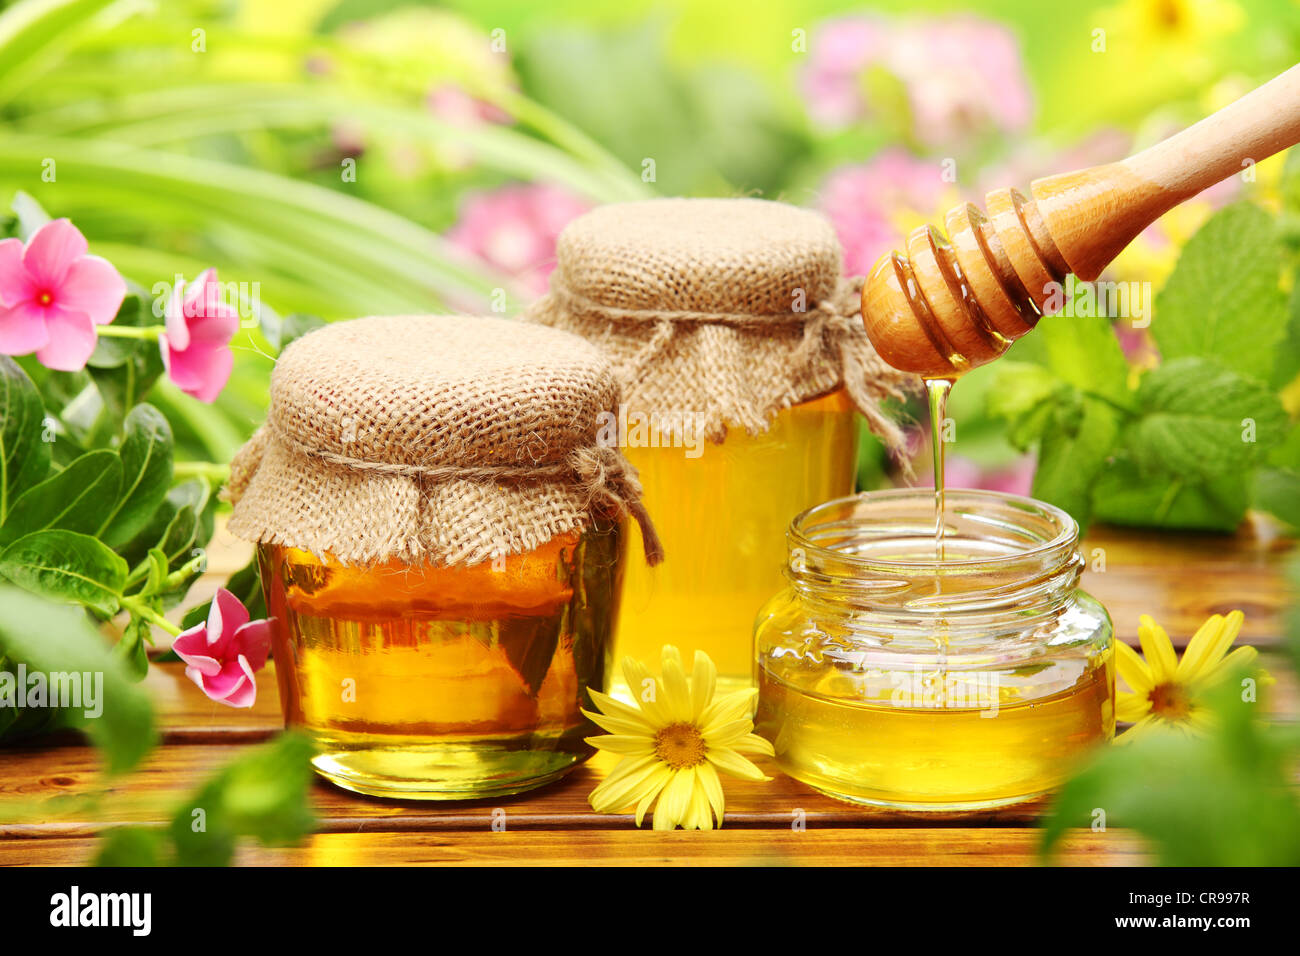 Honey in glass jars with flowers background. Stock Photo